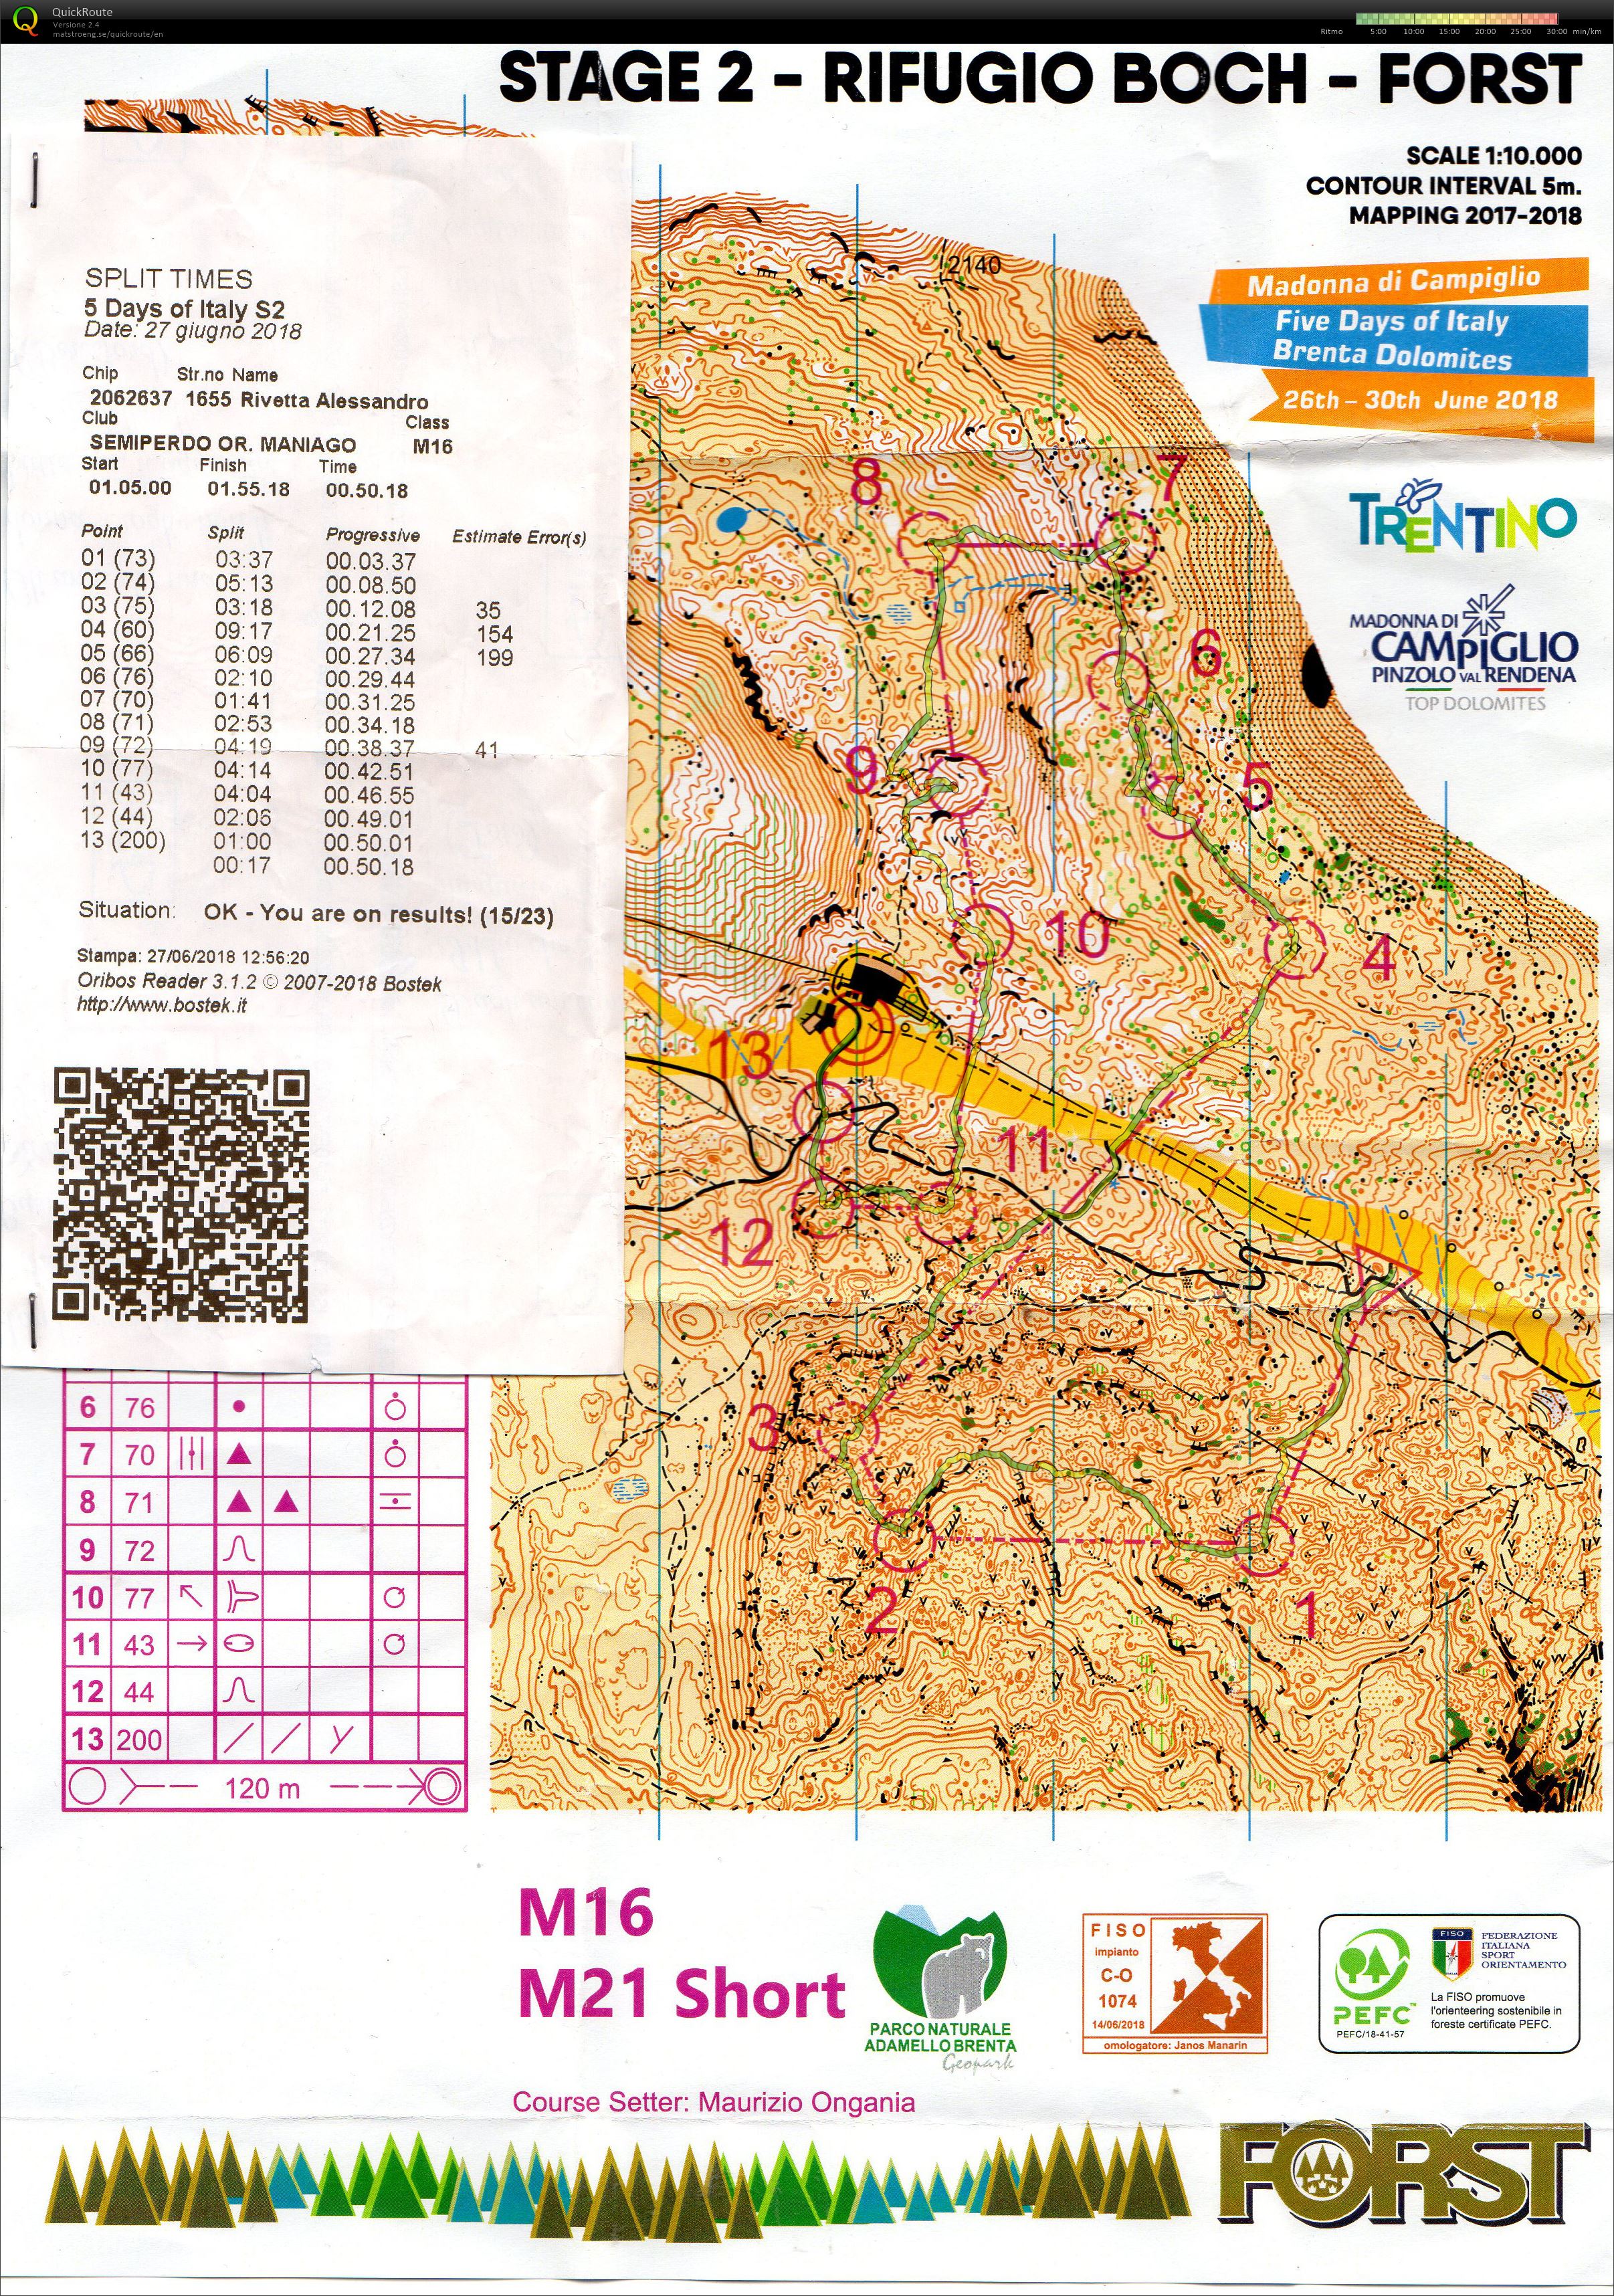 5 days of Italiy__Stage 2 (2018-06-27)